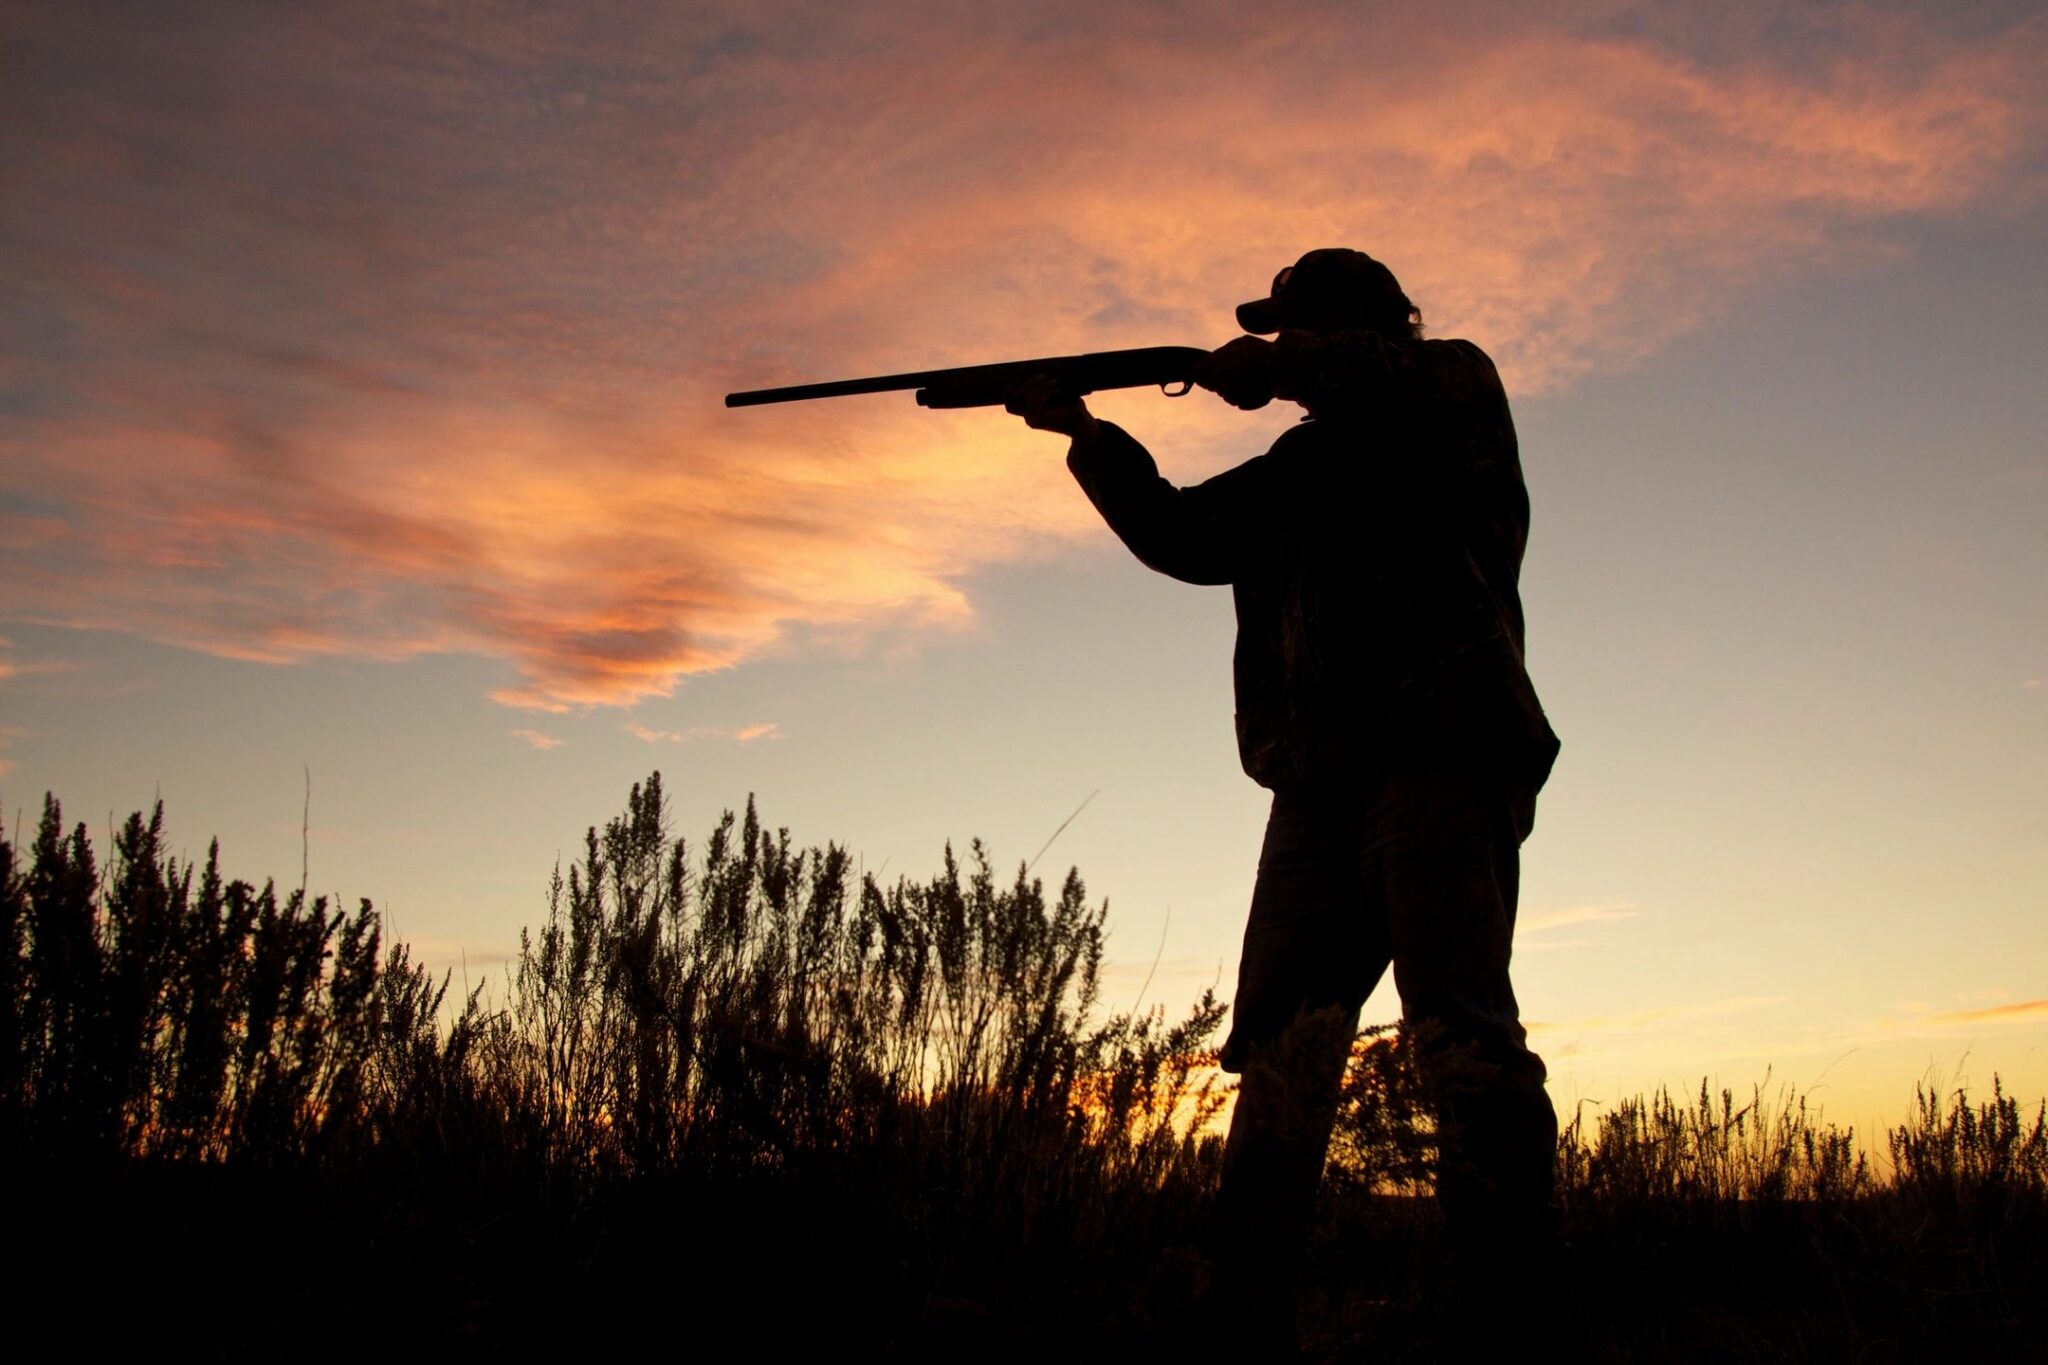 Game Commission Readies For First Saturday-Sunday Hunting Weekend